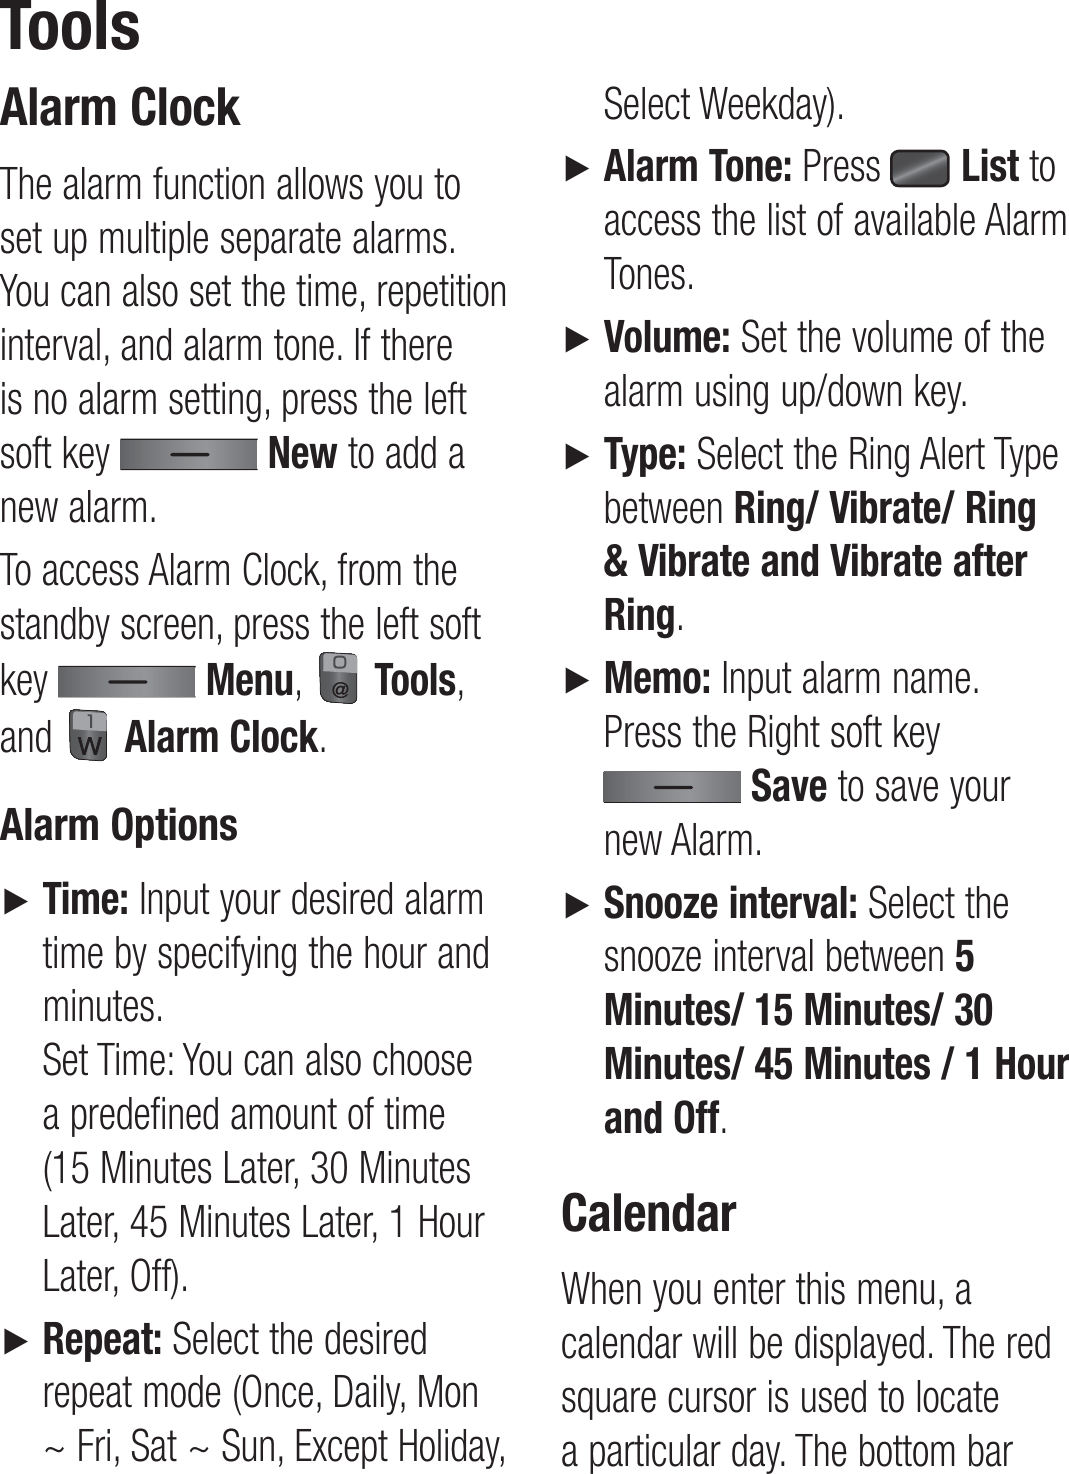 Alarm ClockThe alarm function allows you to set up multiple separate alarms. You can also set the time, repetition interval, and alarm tone. If there is no alarm setting, press the left soft key   New to add a new alarm.To access Alarm Clock, from the standby screen, press the left soft key   Menu,   Tools, and   Alarm Clock.Alarm Options►   Time: Input your desired alarm time by specifying the hour and minutes. Set Time: You can also choose a predefined amount of time (15 Minutes Later, 30 Minutes Later, 45 Minutes Later, 1 Hour Later, Off).►    Repeat: Select the desired repeat mode (Once, Daily, Mon ~ Fri, Sat ~ Sun, Except Holiday, Select Weekday).►  Alarm Tone: Press   List to access the list of available Alarm Tones.►   Volume: Set the volume of the alarm using up/down key.►  Type: Select the Ring Alert Type between Ring/ Vibrate/ Ring &amp; Vibrate and Vibrate after Ring.►    Memo: Input alarm name.  Press the Right soft key  Save to save your new Alarm. ►  Snooze interval: Select the snooze interval between 5 Minutes/ 15 Minutes/ 30 Minutes/ 45 Minutes / 1 Hour and Off.CalendarWhen you enter this menu, a calendar will be displayed. The red square cursor is used to locate a particular day. The bottom bar Tools